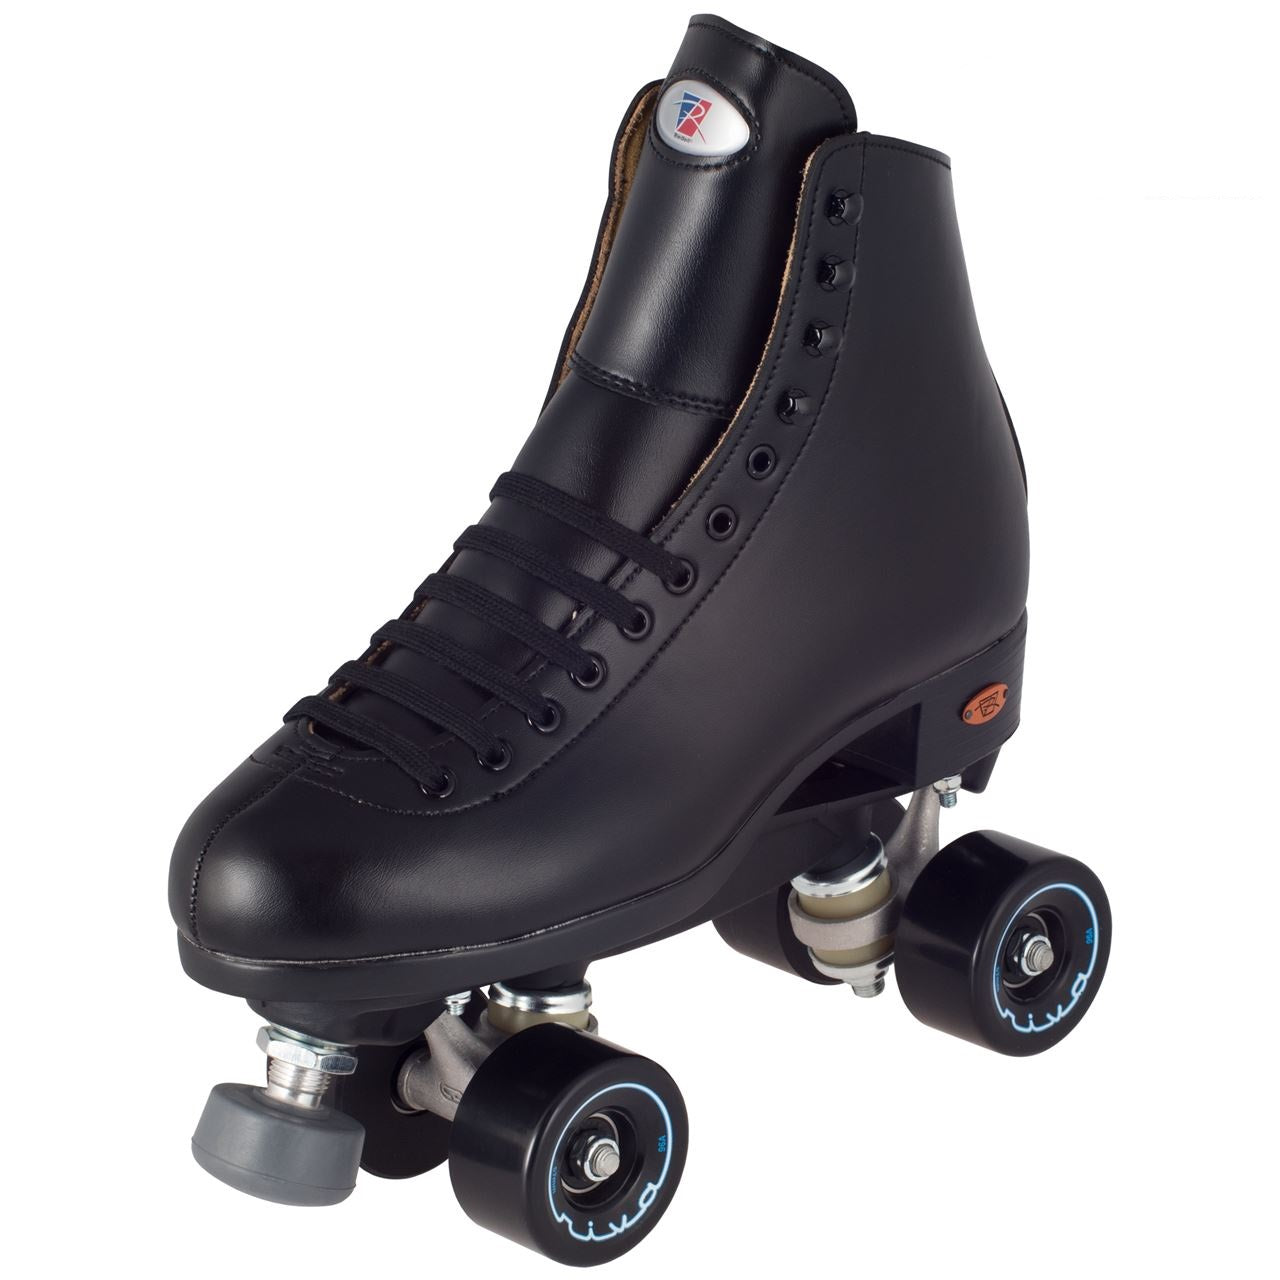 Patines Riedell 111 Angel Negro - Ancho D Ancho